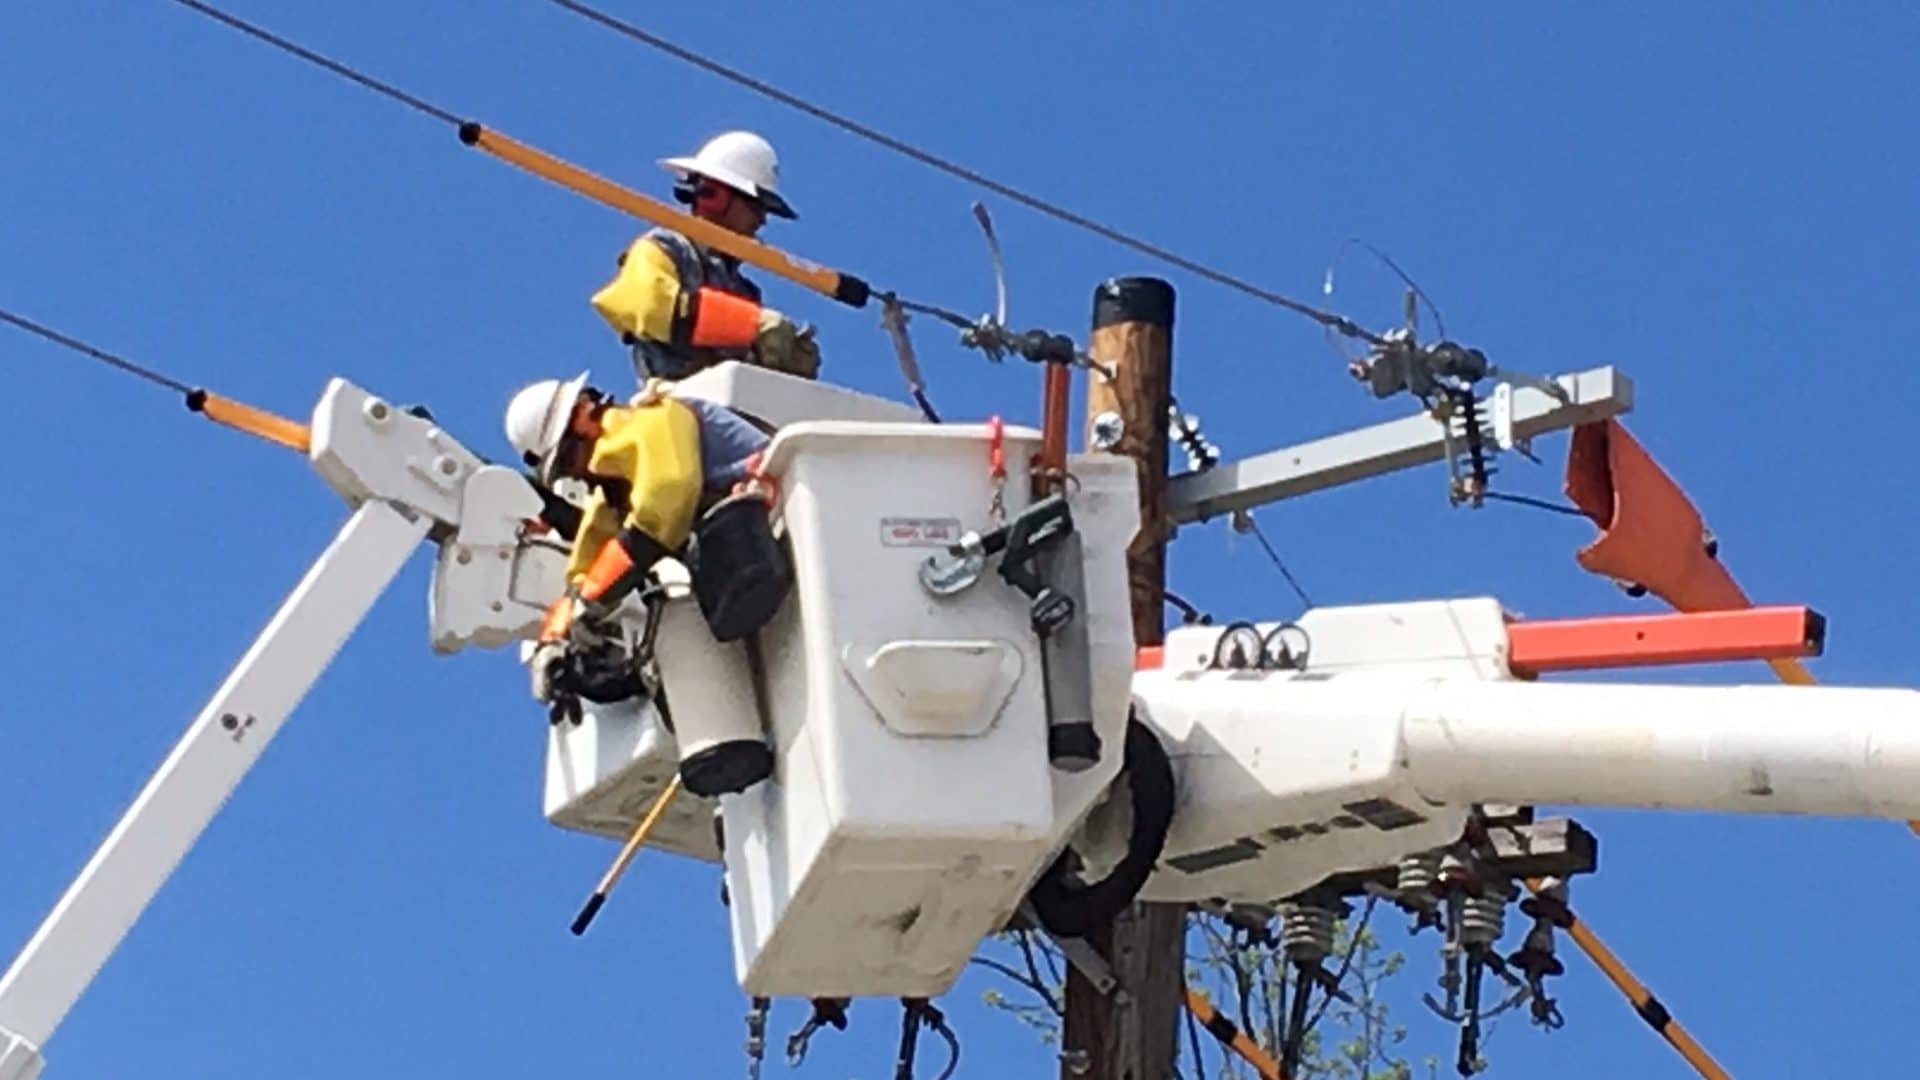 Utility crew in lift-buckets using Sonetics Wireless Headset while performing maintenance on transmission lines.